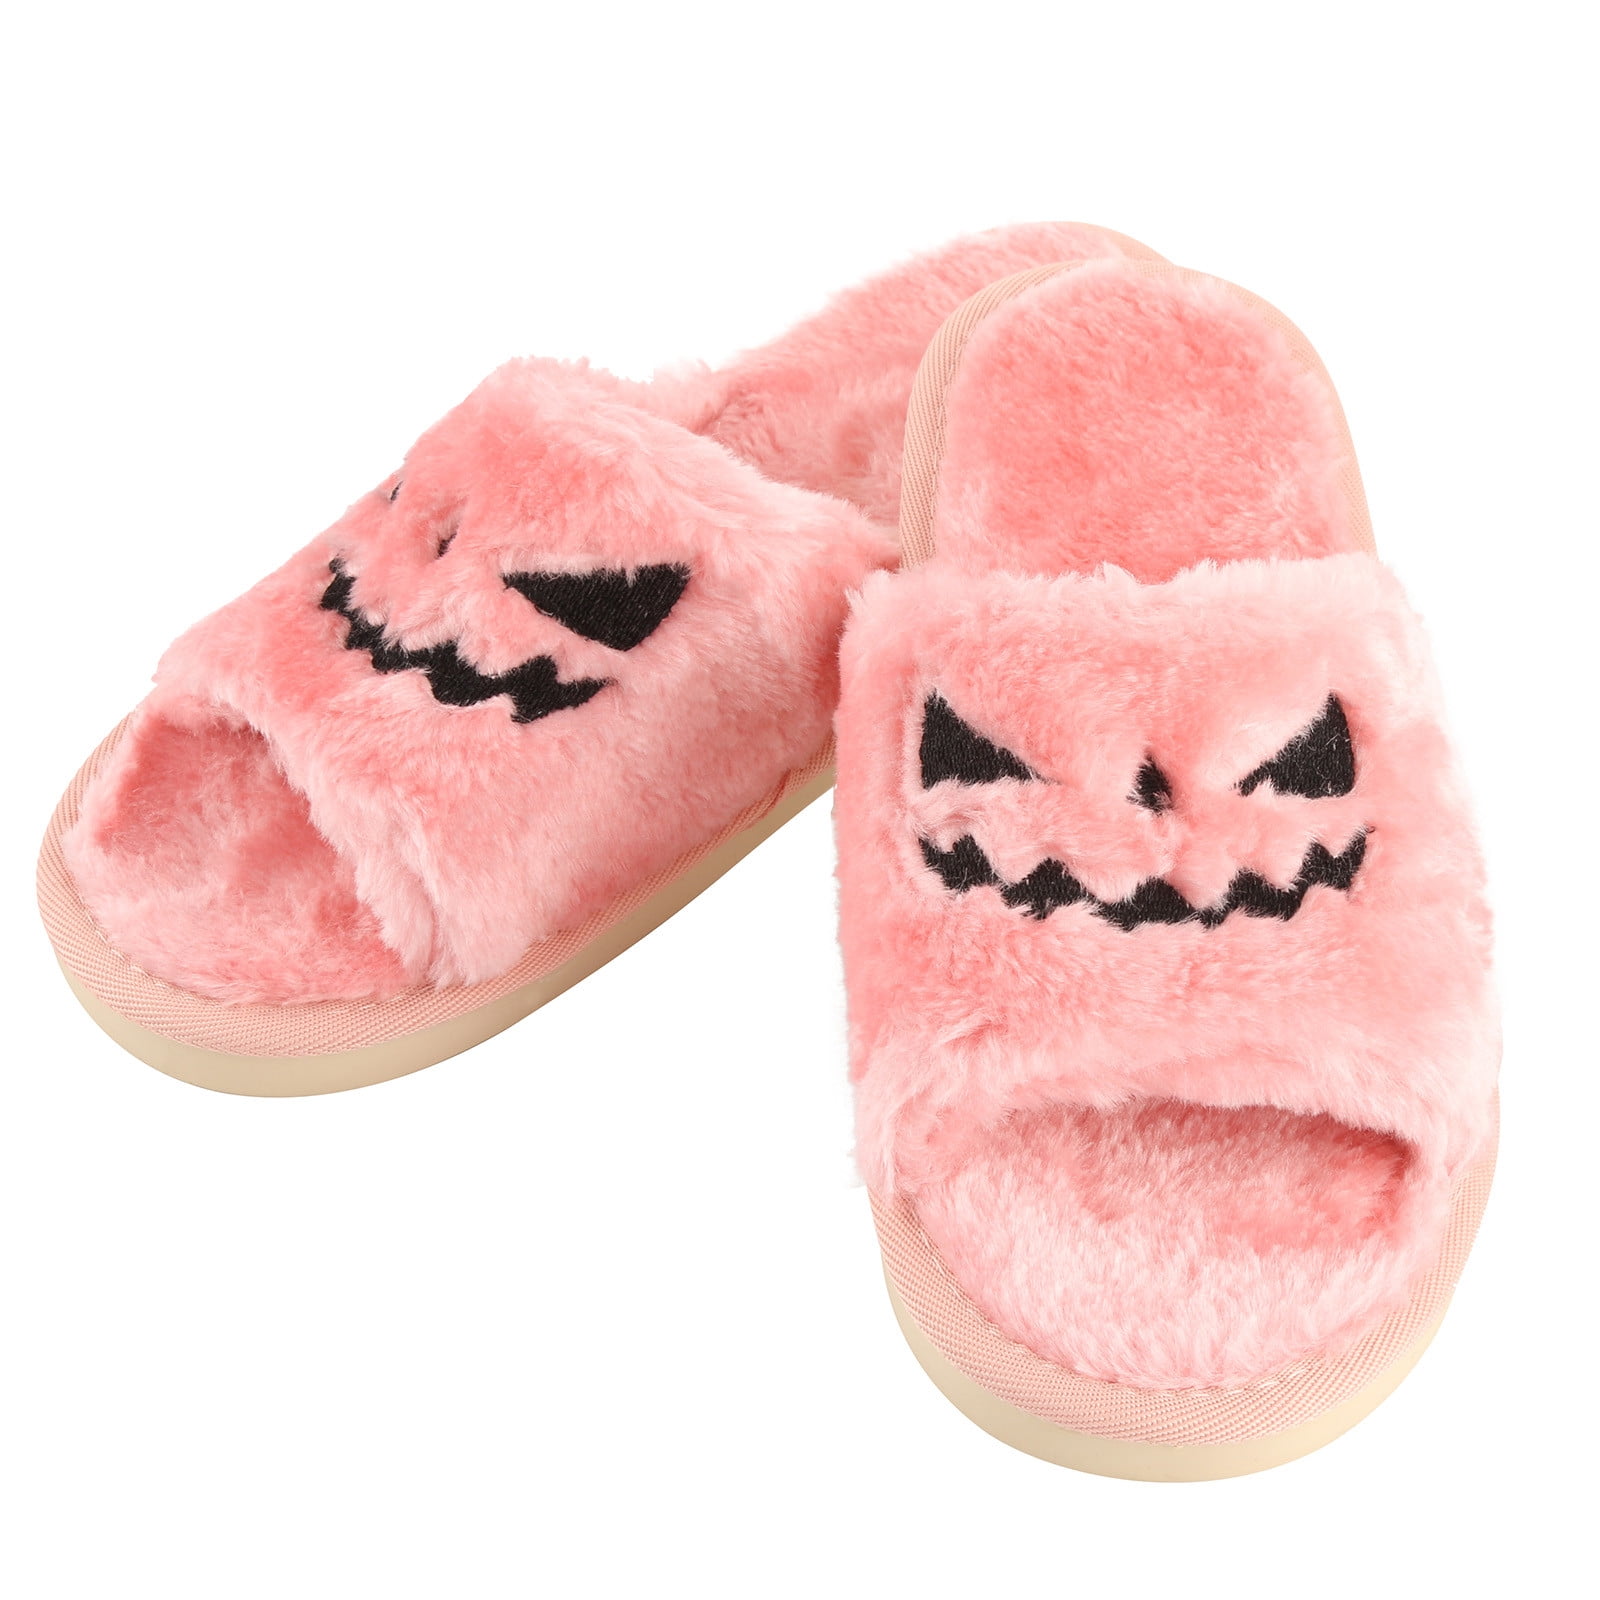 TWO SOFT Slippers - Buy TWO SOFT Slippers Online at Best Price - Shop  Online for Footwears in India | Flipkart.com